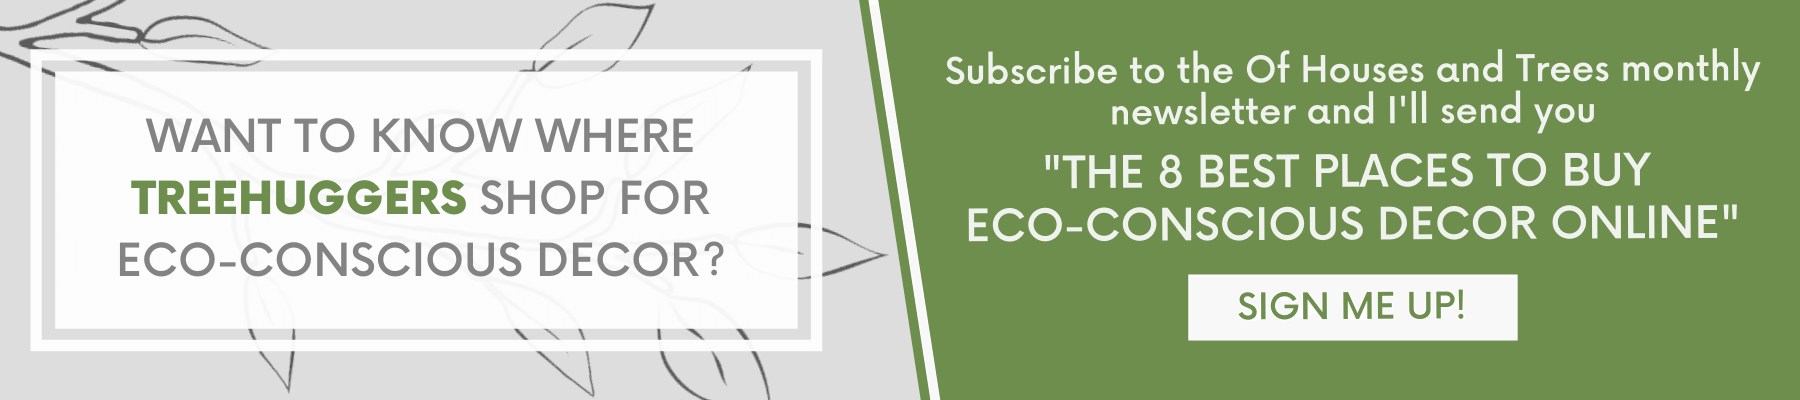 Click here to subscribe to the Of Houses and Trees newsletter and get "The 8 Best Places to Buy Eco-Conscious Decor" delivered to your inbox!